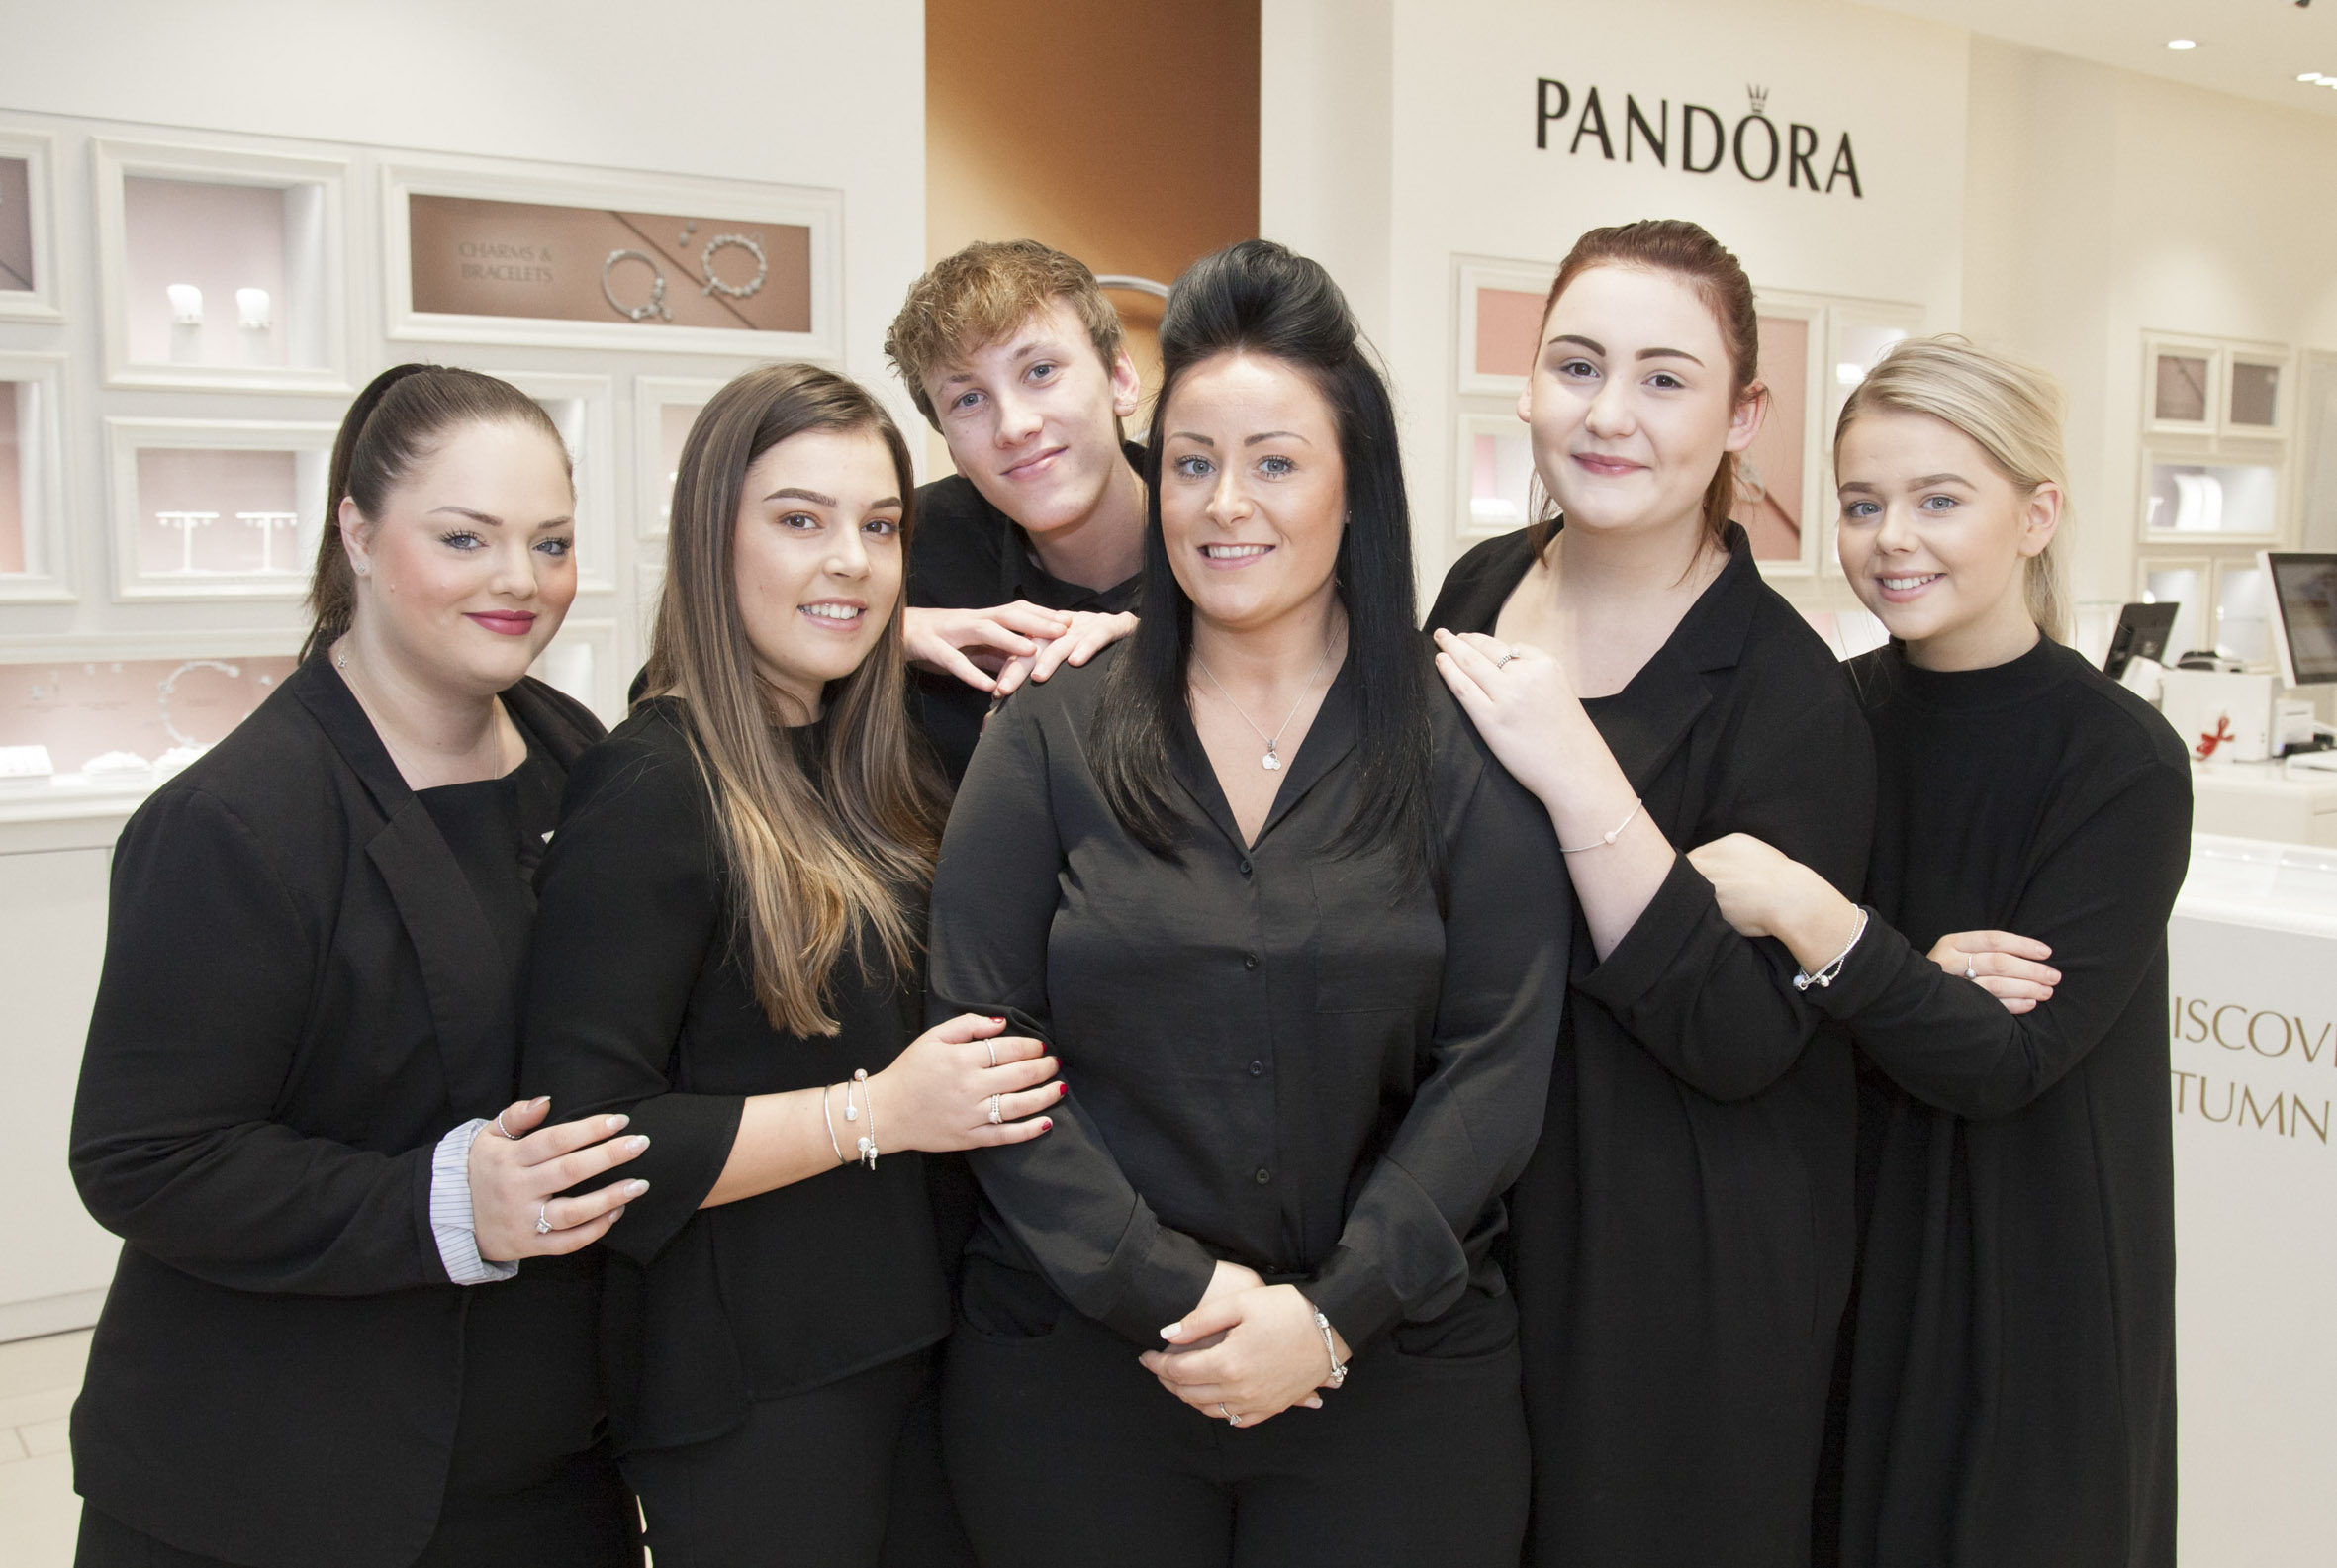 New Pandora shop manager aims to make it a jewel in the crown